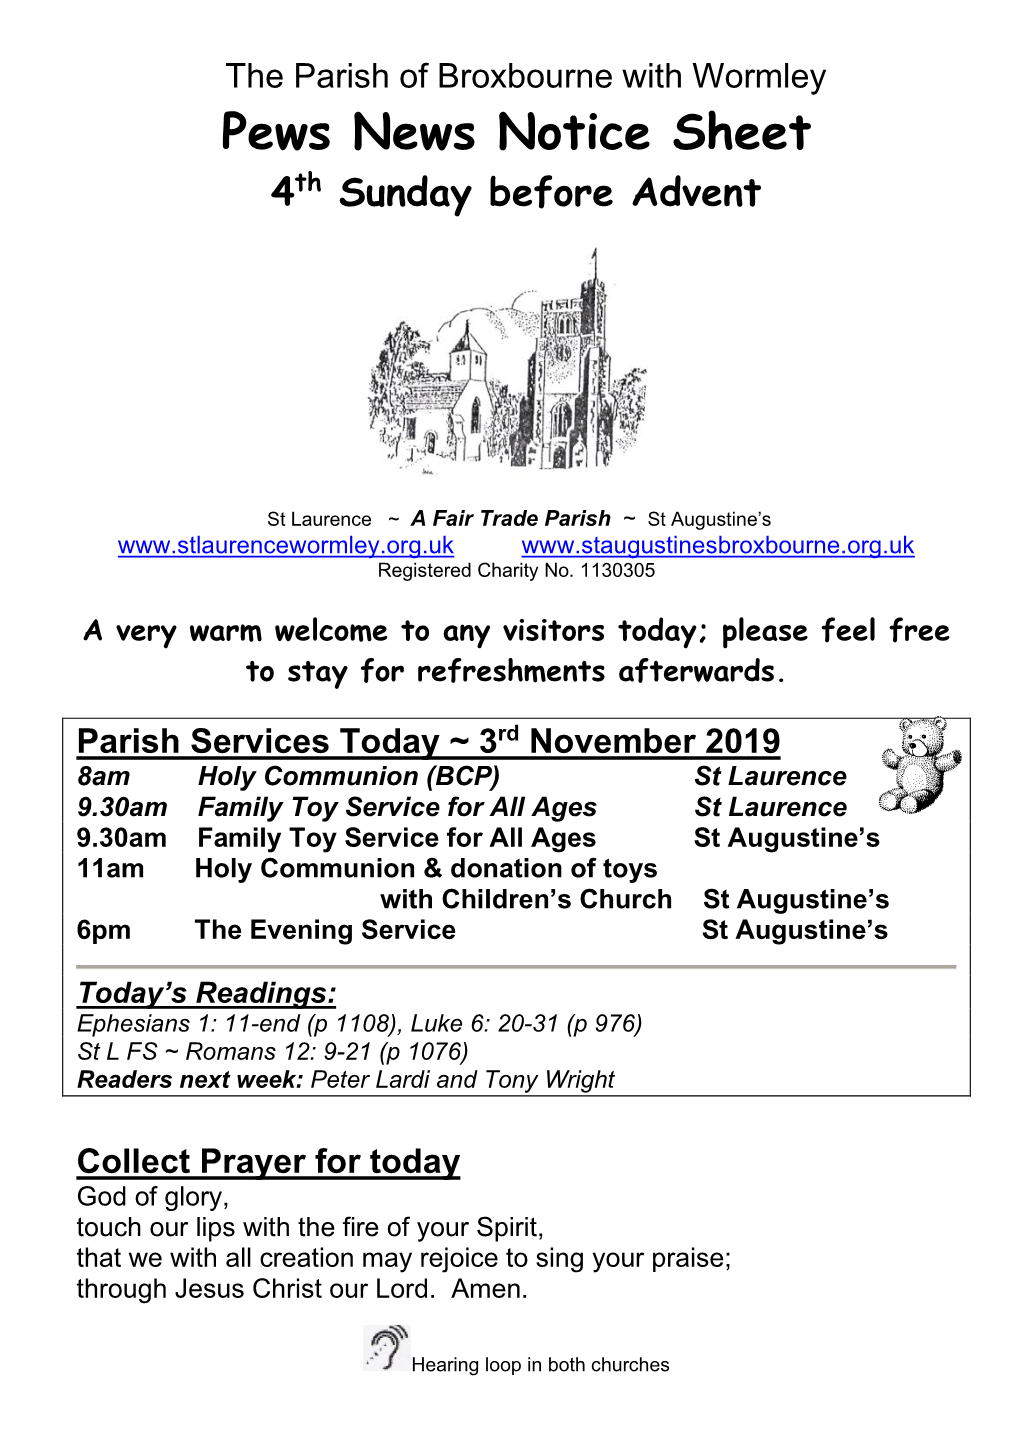 The Parish of Broxbourne with Wormley Pews News Notice Sheet 4Th Sunday Before Advent